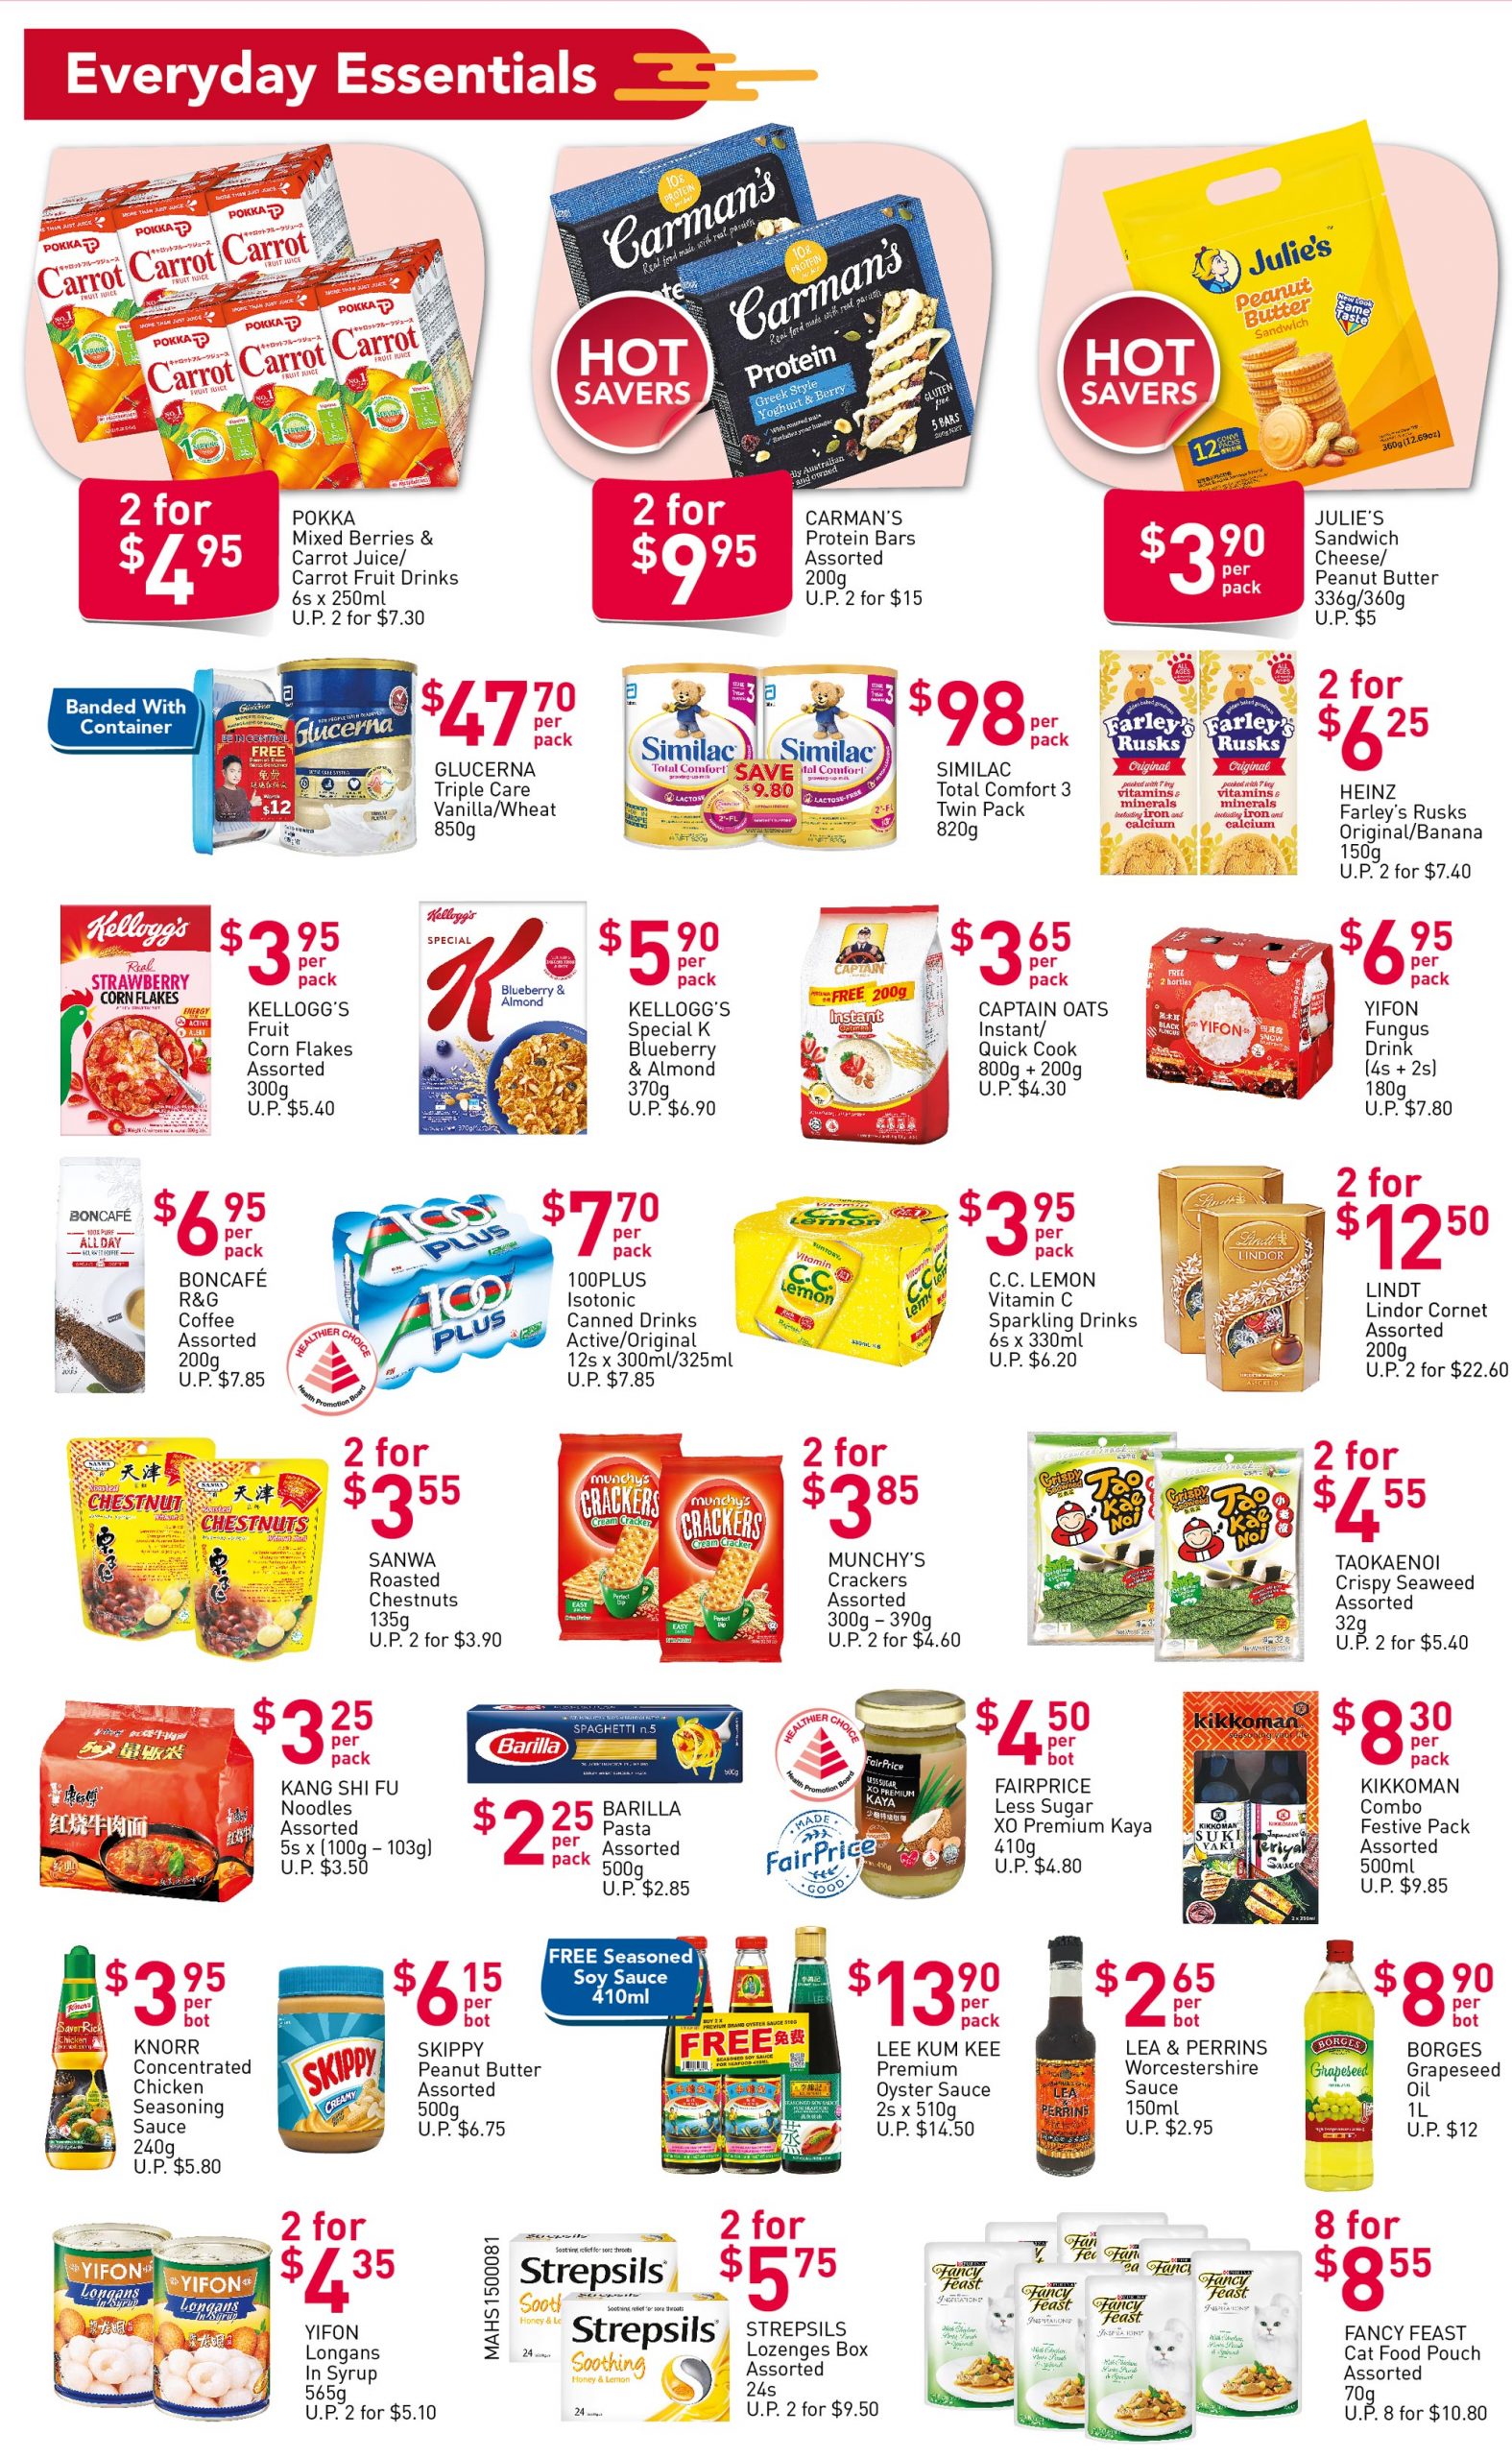 FairPrice’s weekly saver deals till 10 February 2021